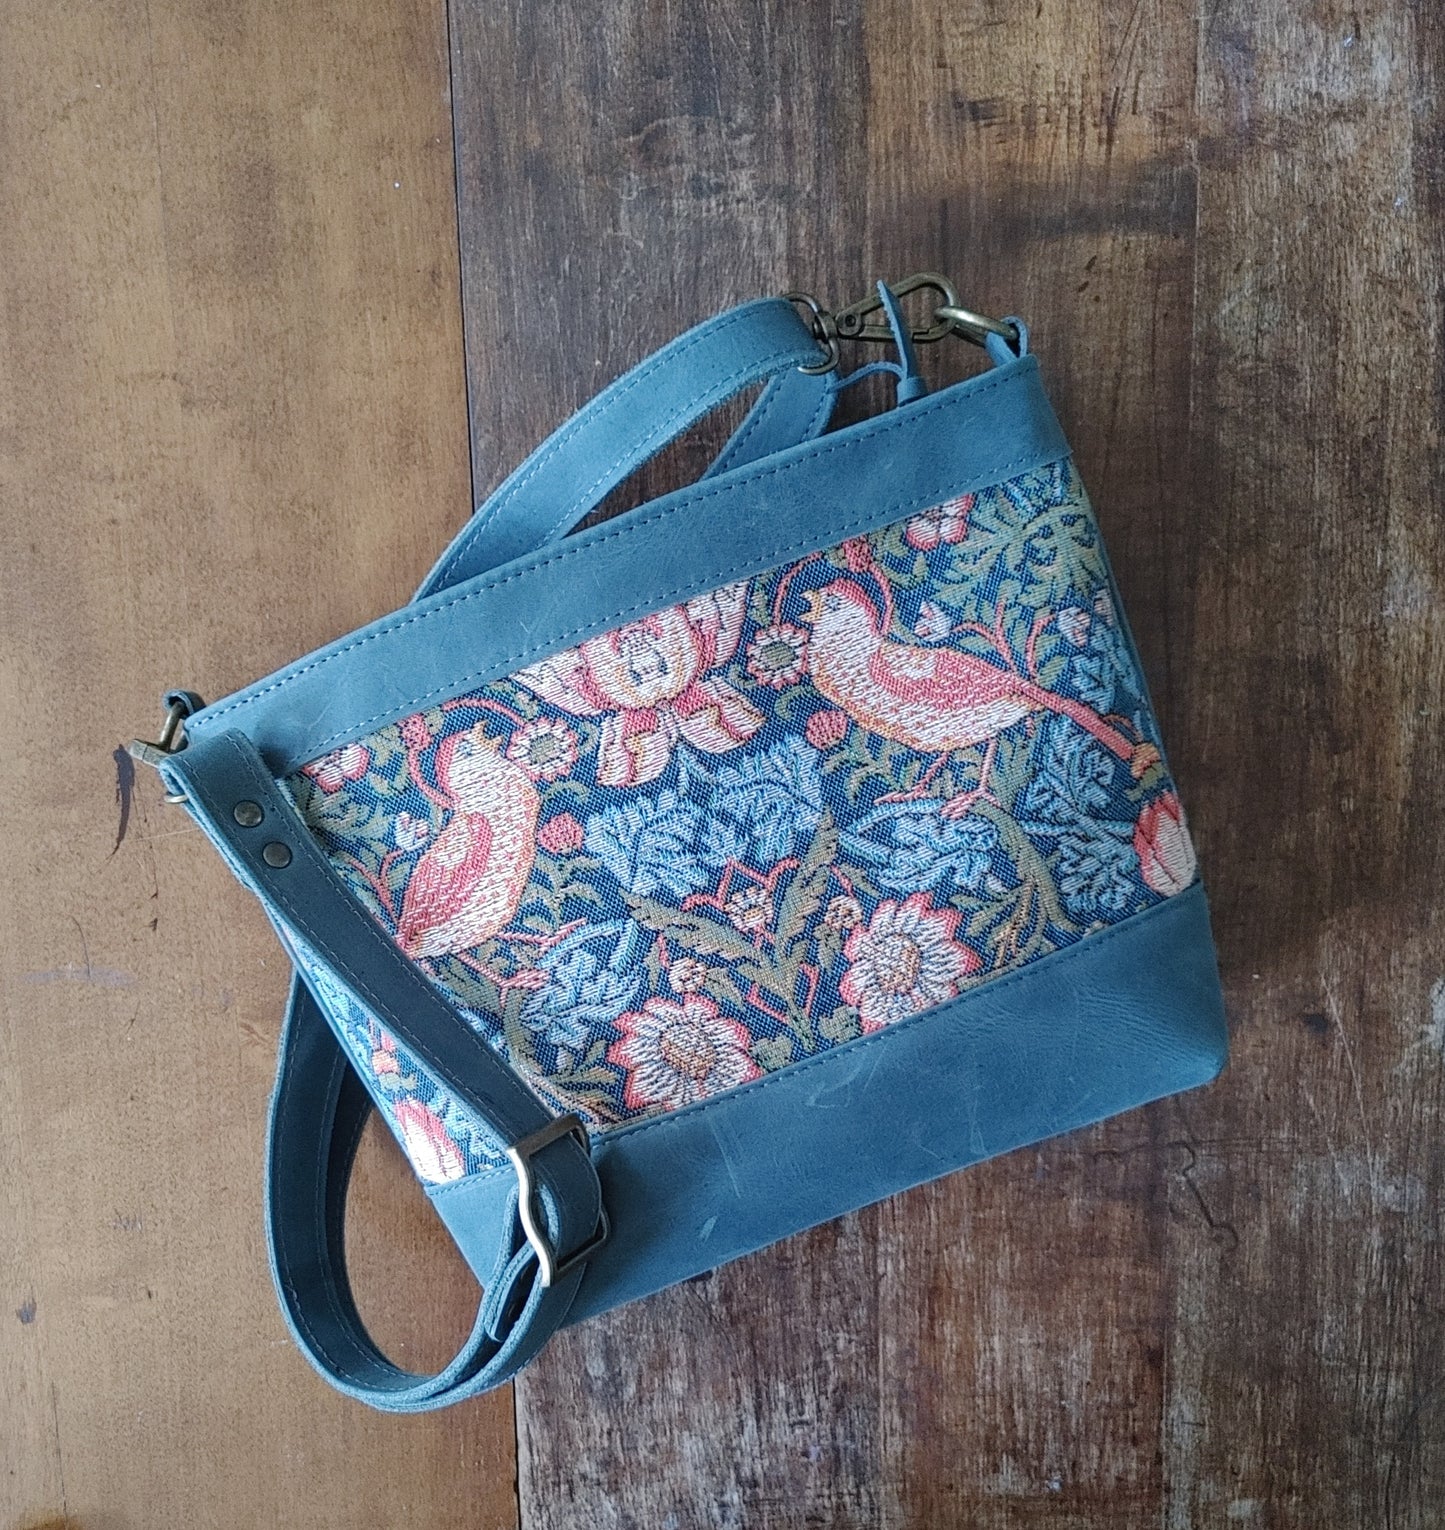 Sapling Zippered Handbag in Teal Leather with Tapestry